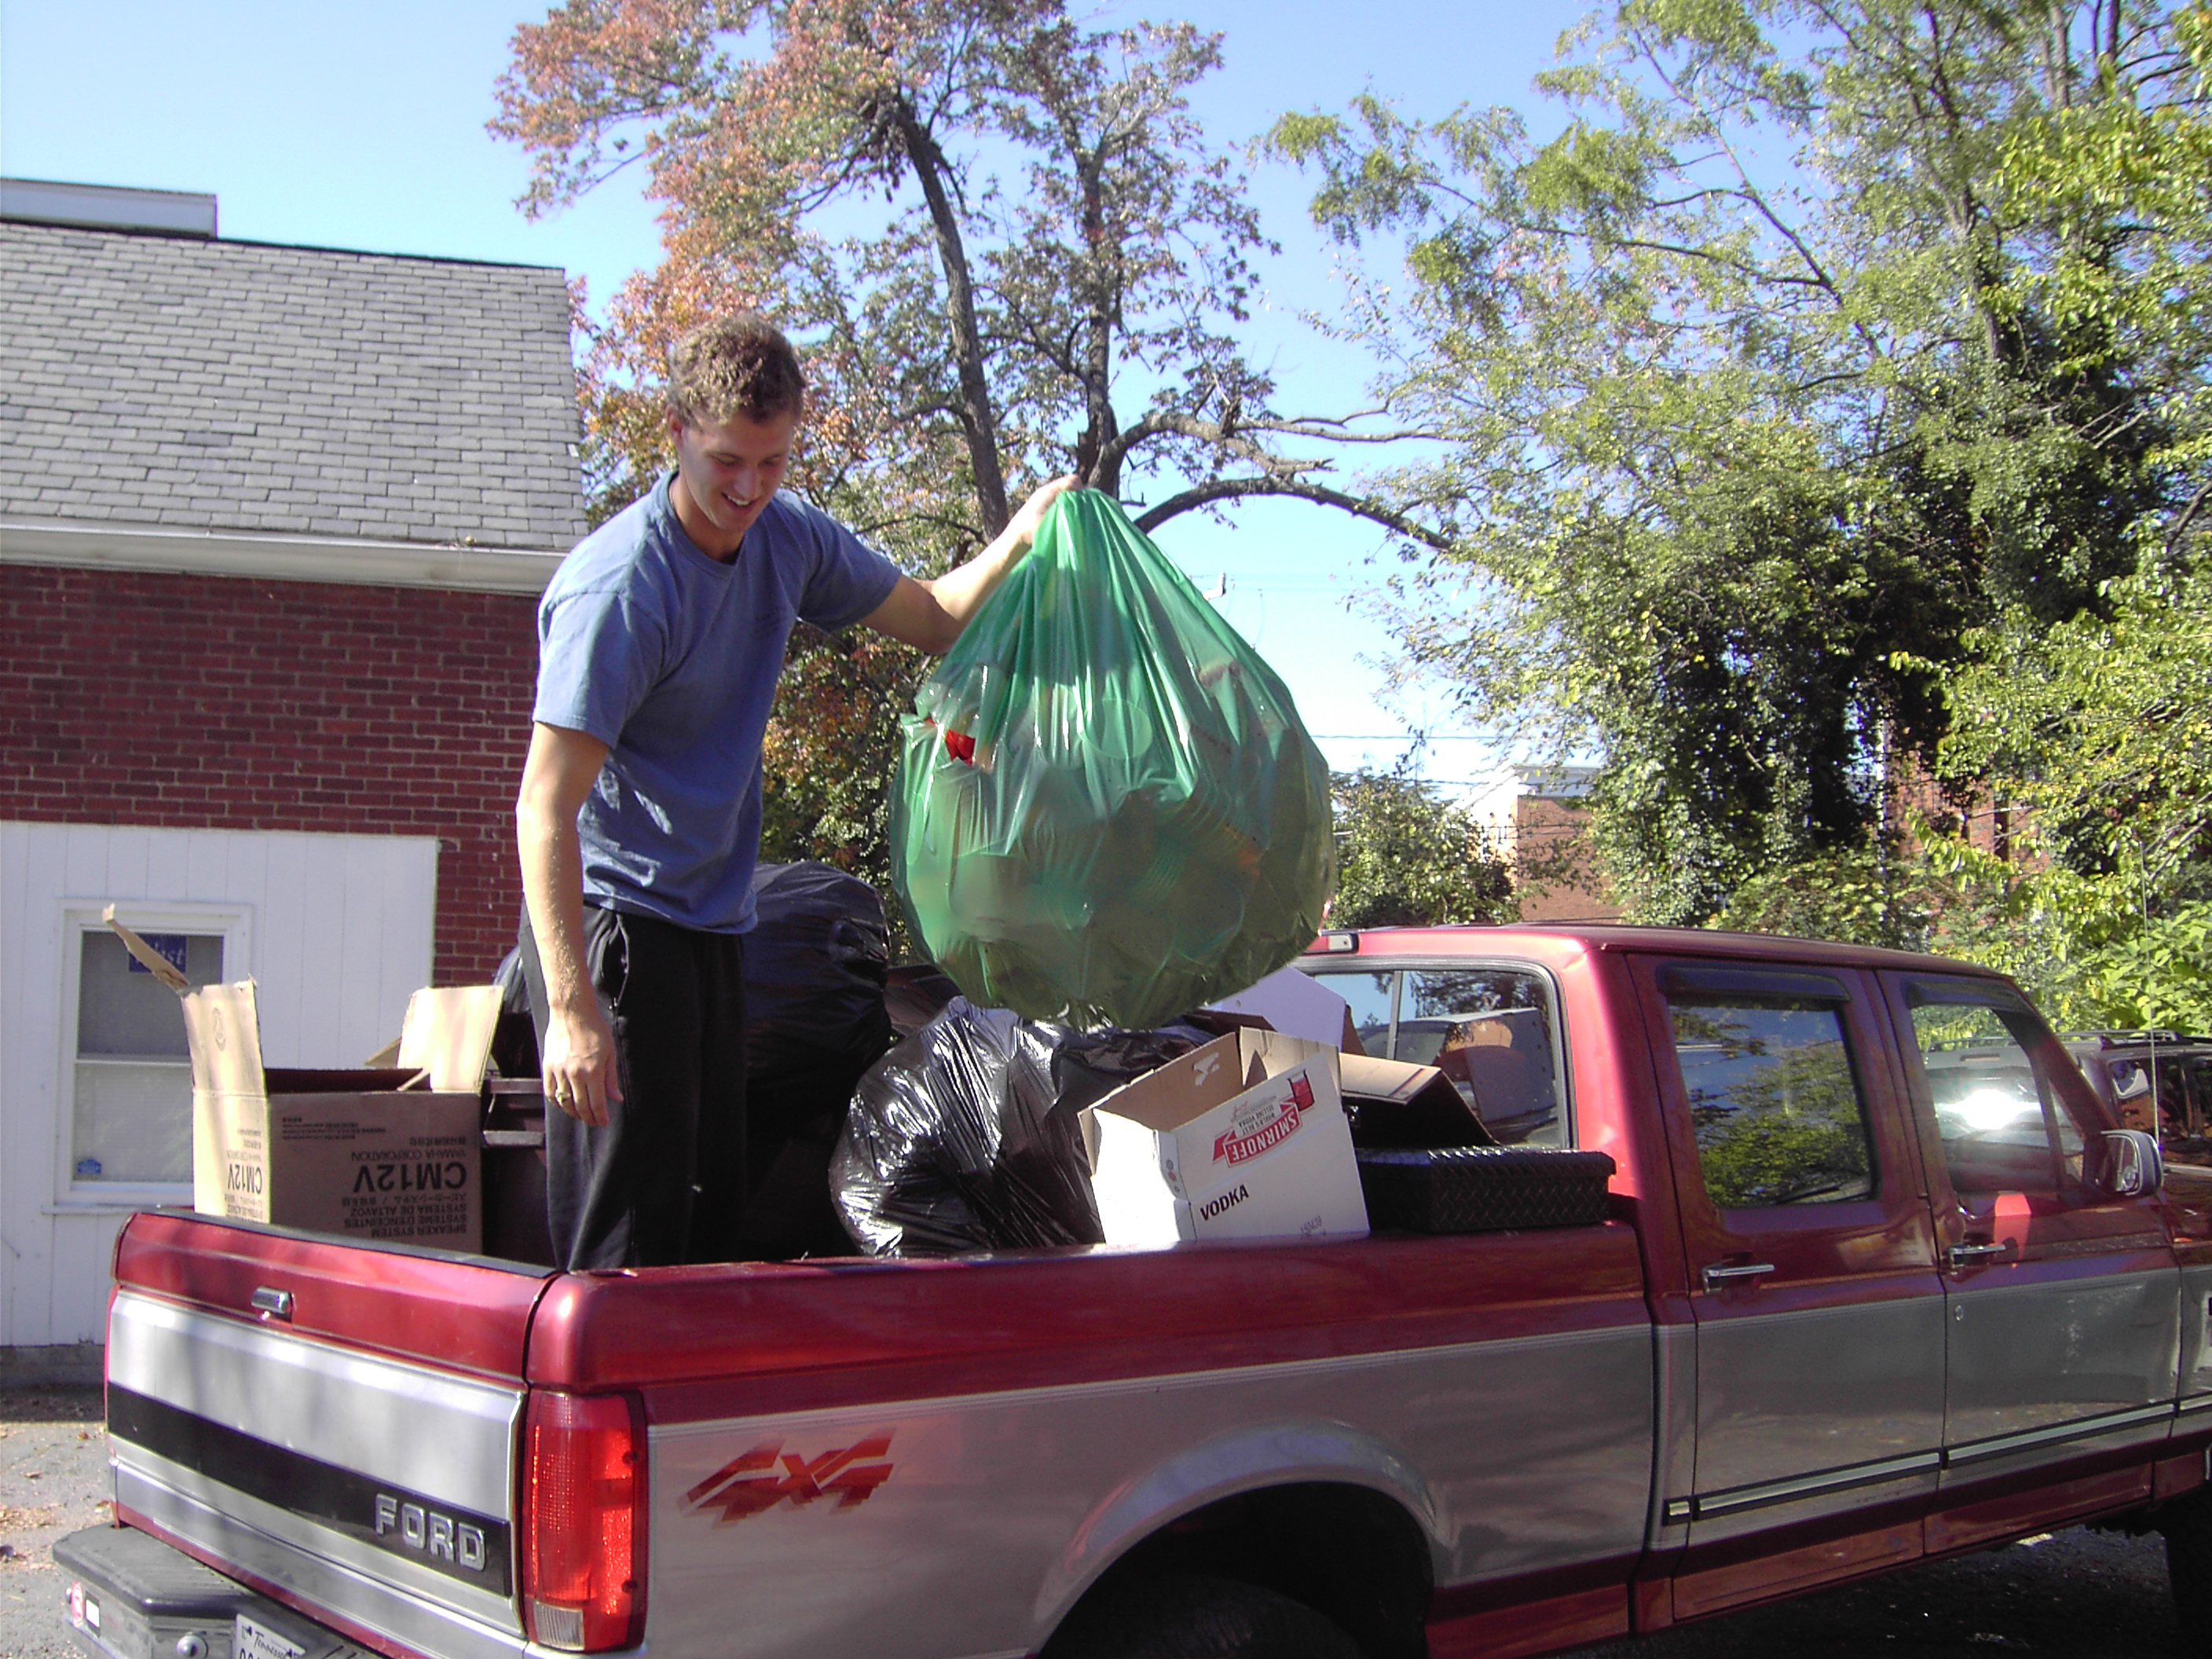 Man standing in the back of a pickup truck placing donated items in the bed